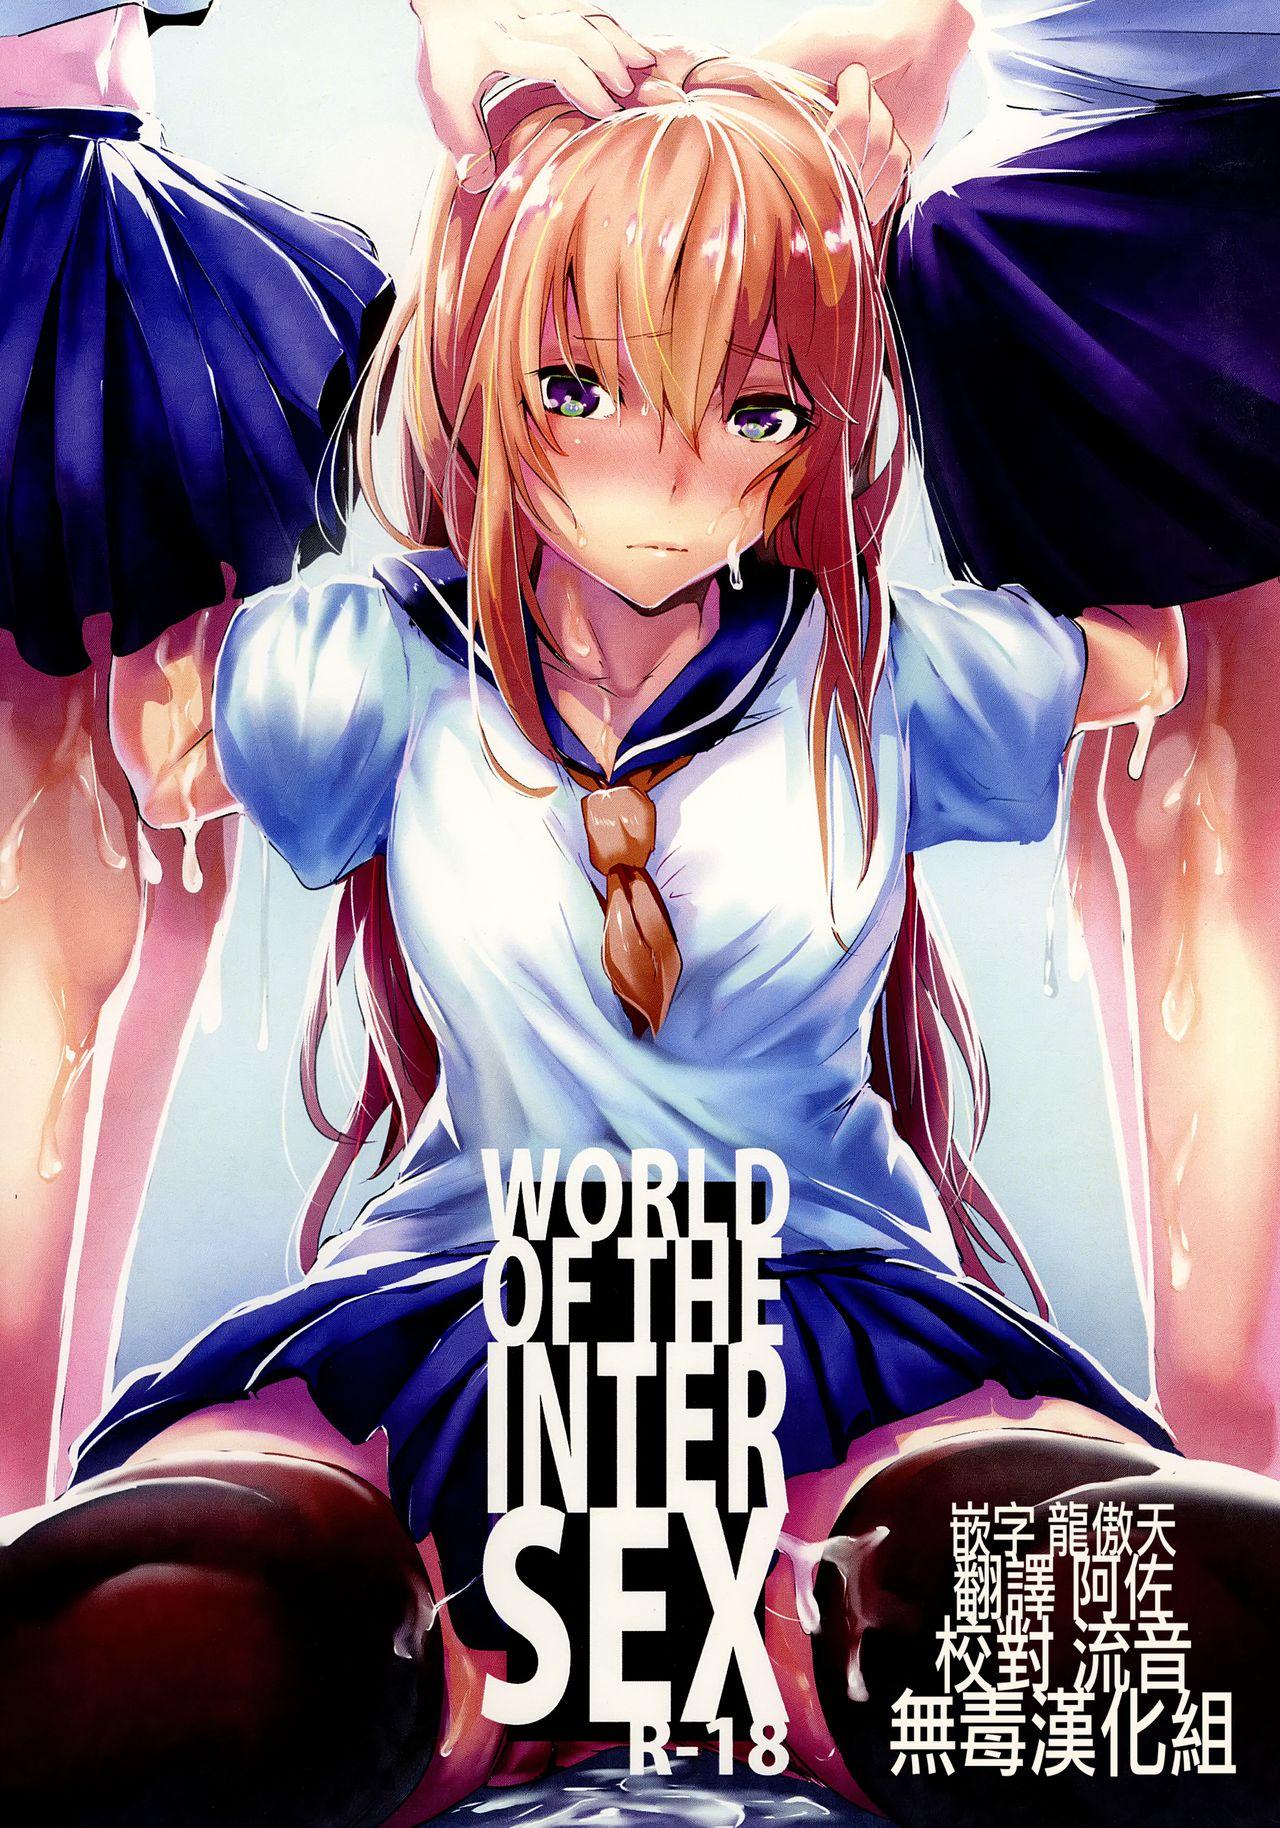 WORLD OF THE INTER SEX 0